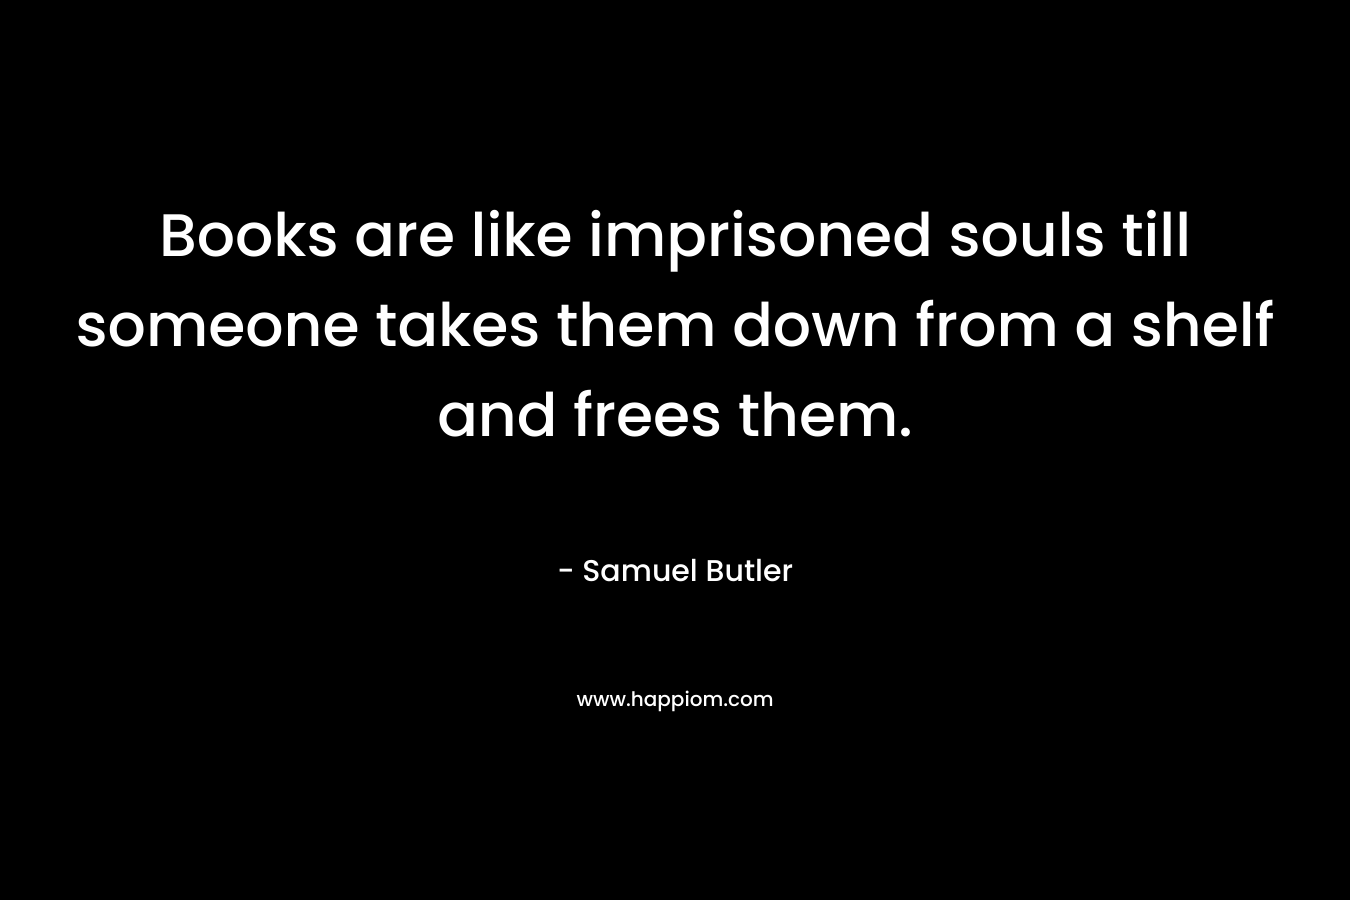 Books are like imprisoned souls till someone takes them down from a shelf and frees them.